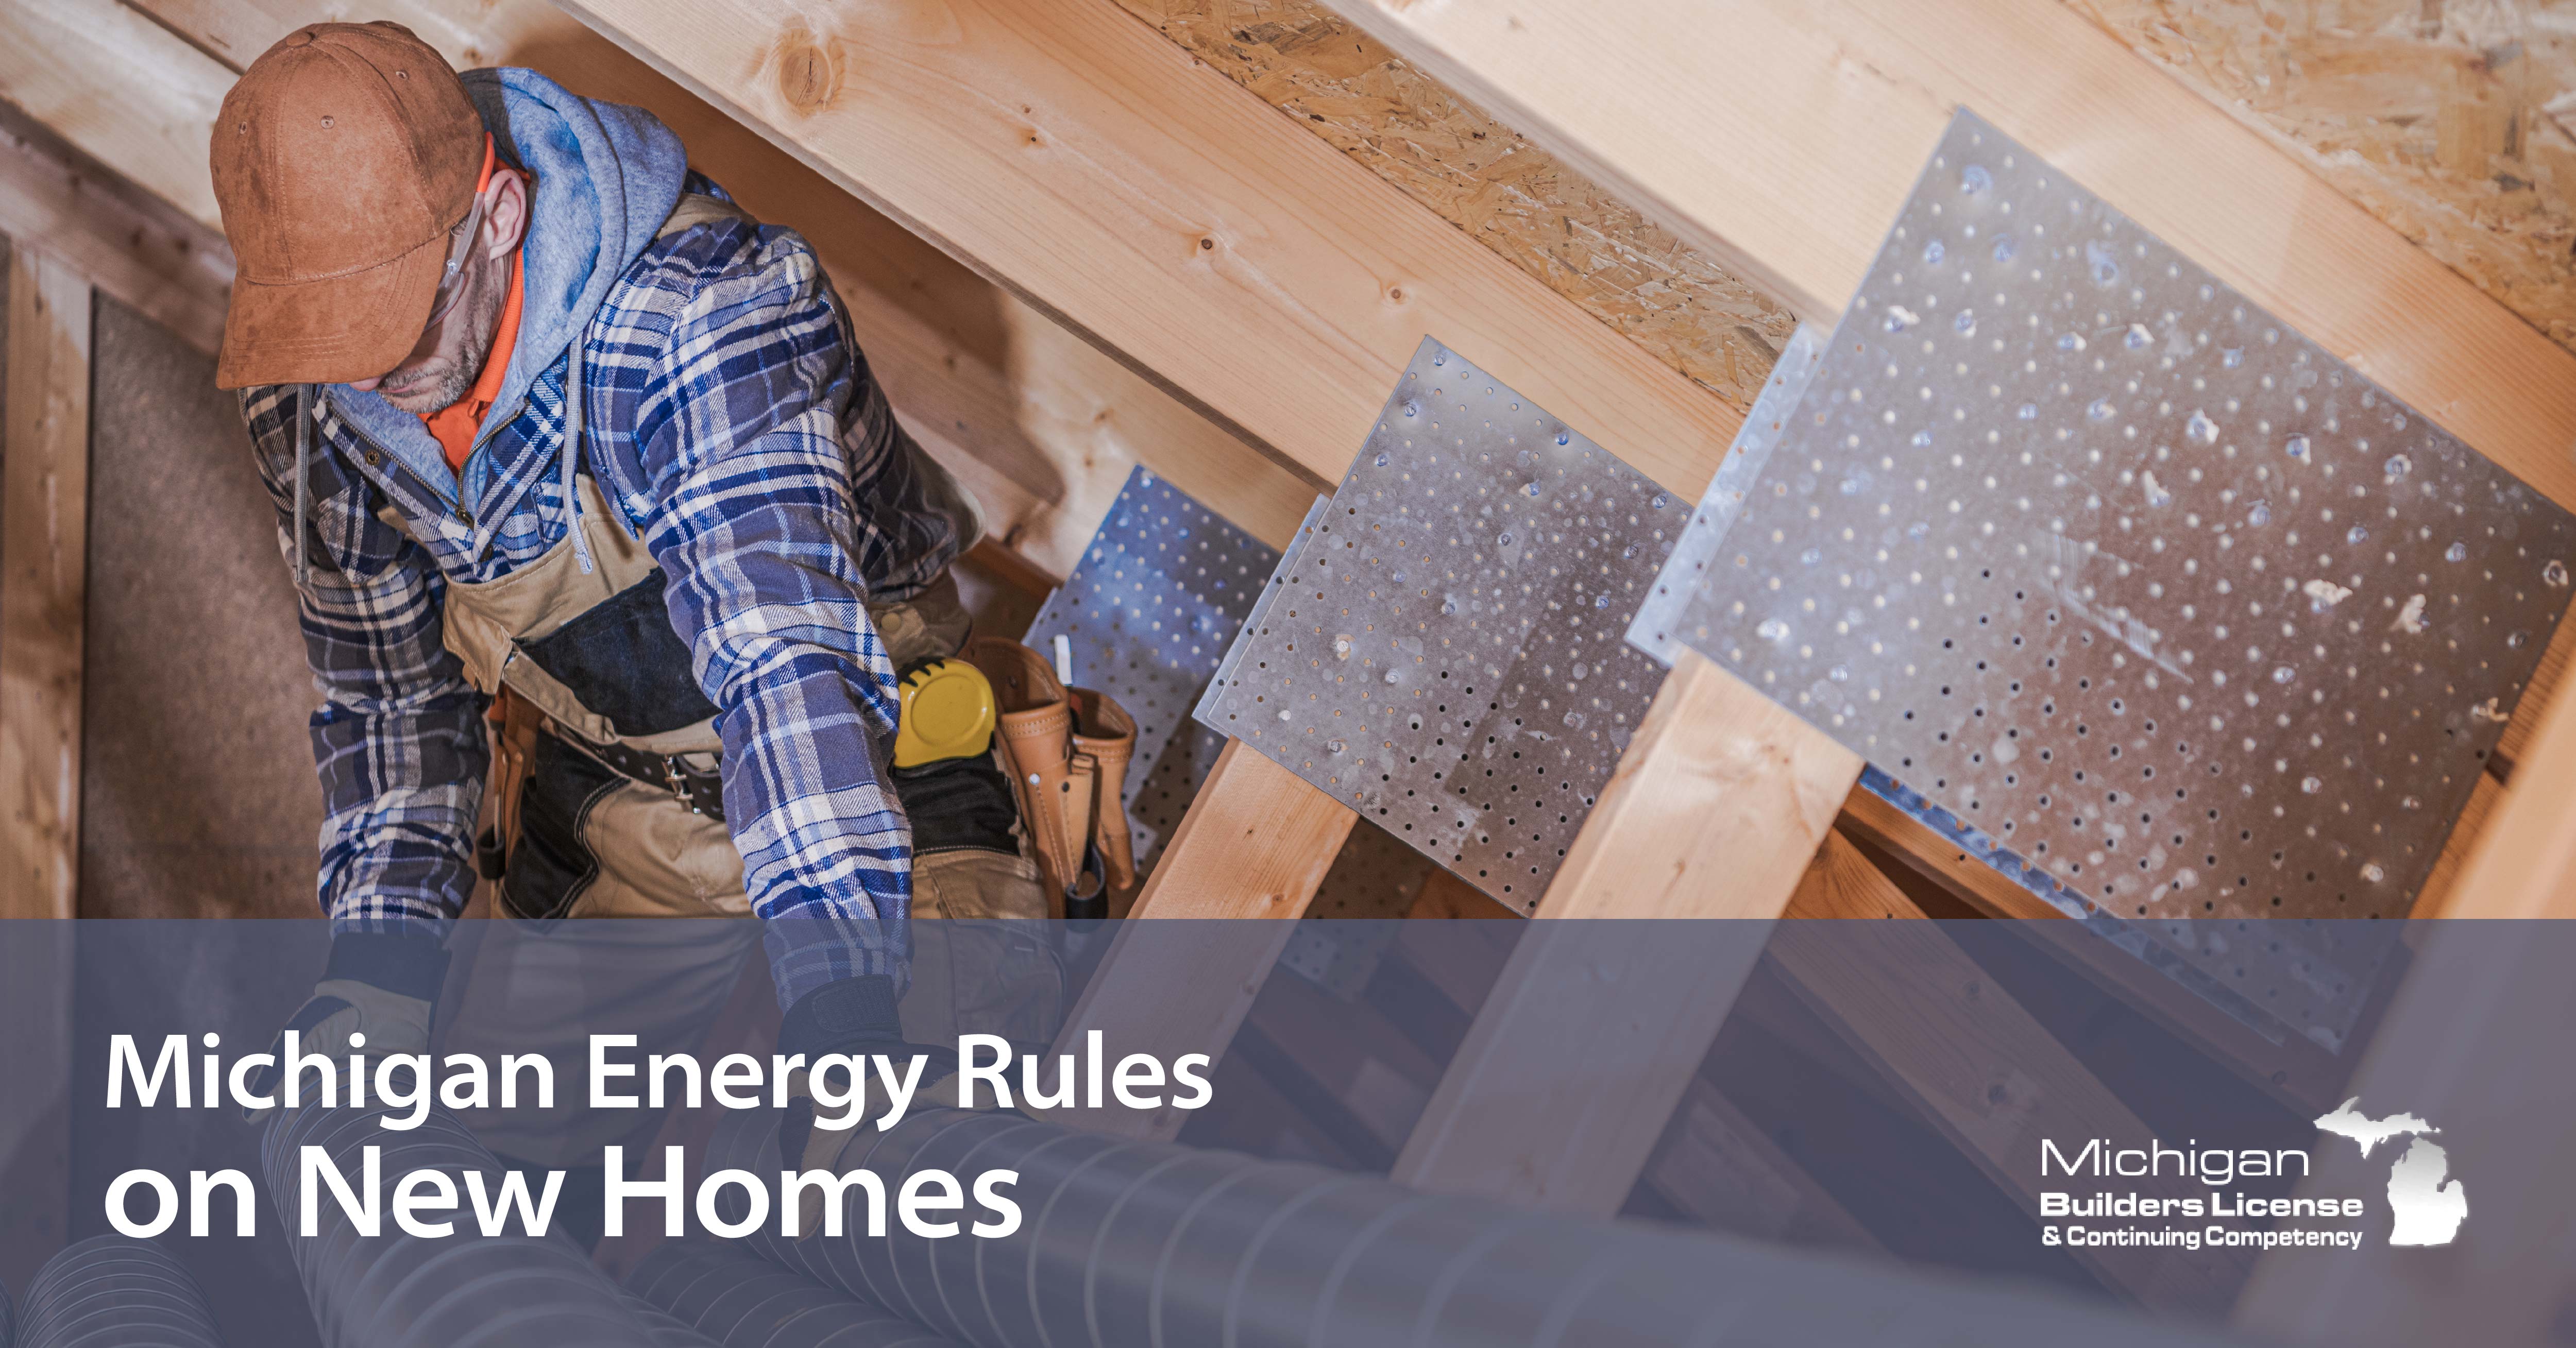 Michigan Energy Rules on New Homes